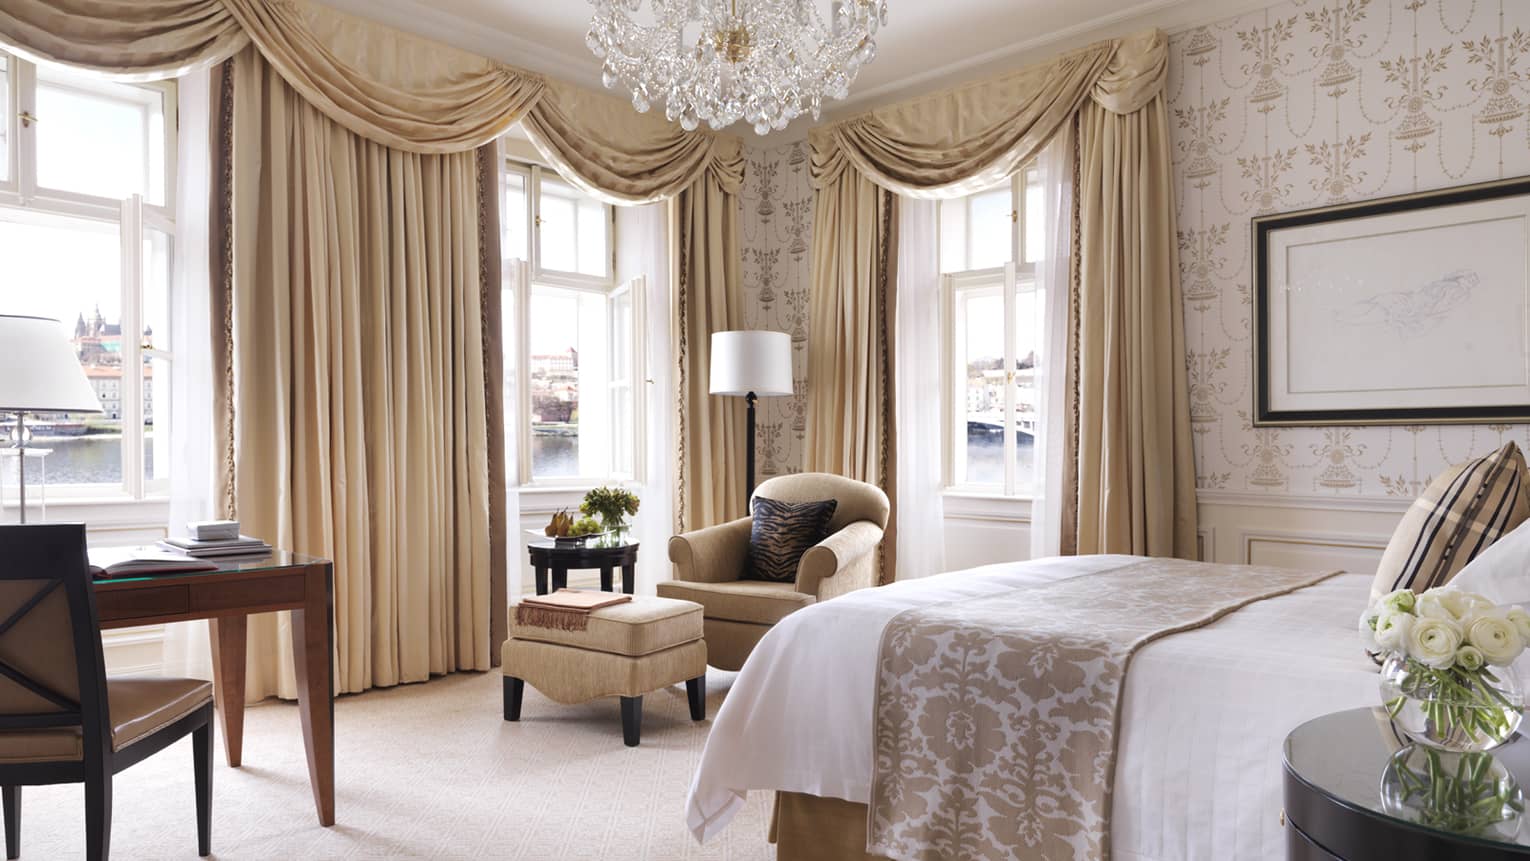 Premier Room bed, desk, chair, cream-and-gold Old European decor, long curtains, crystal chandelier